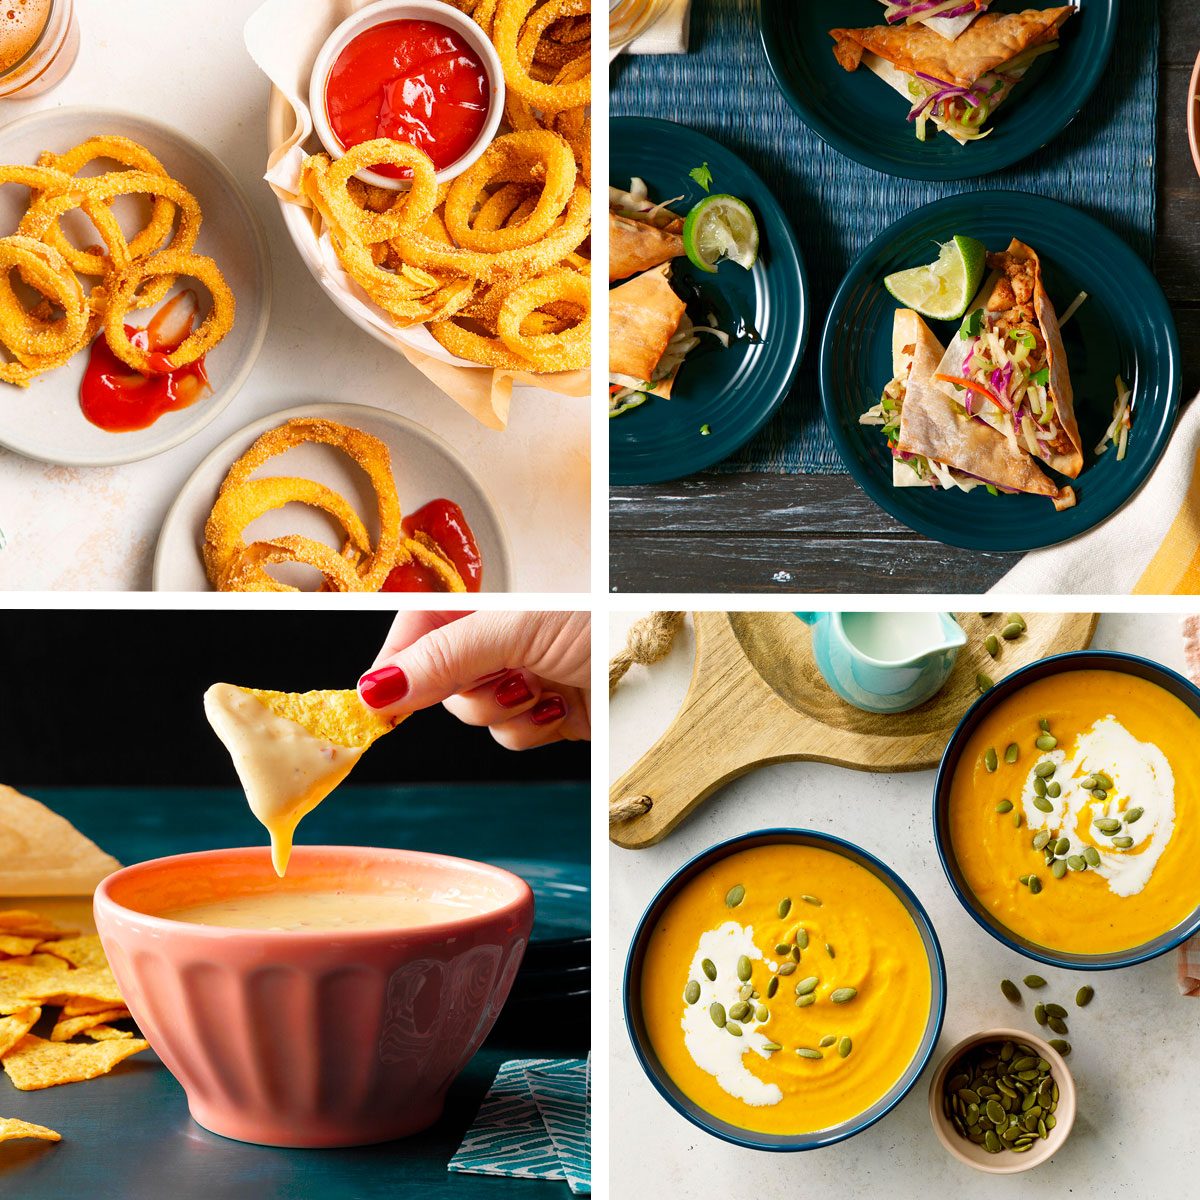 Grid of 4 images with different food items